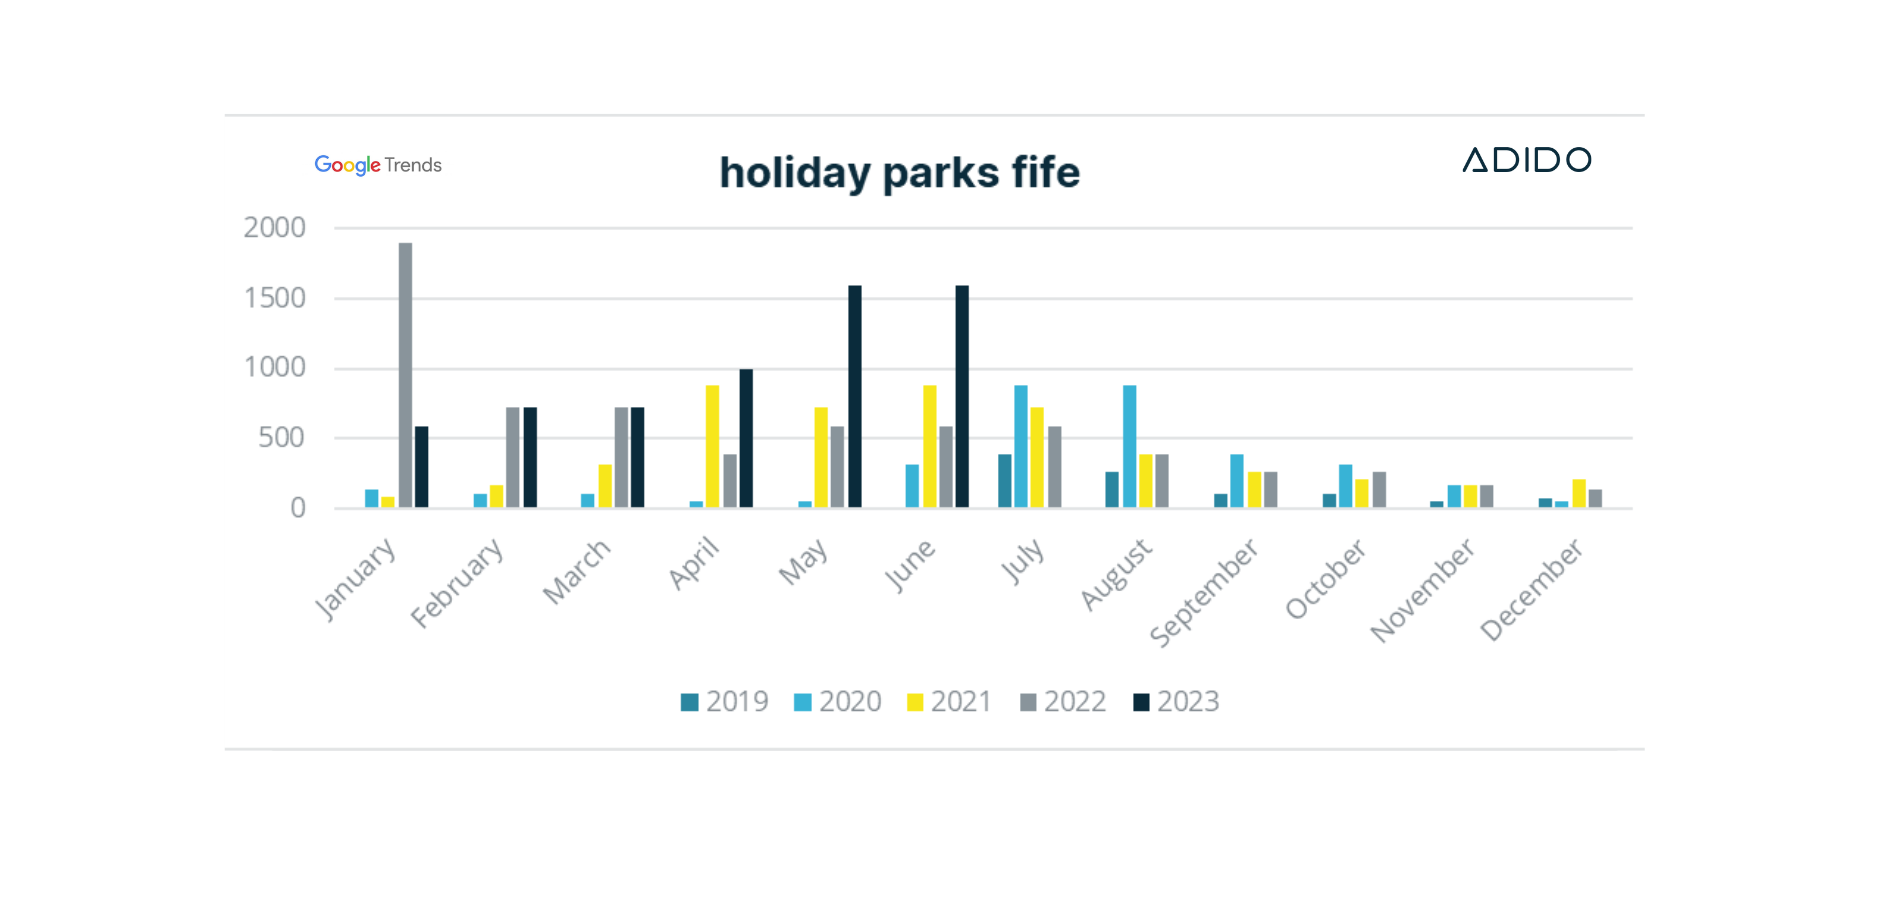 Holiday parks fife search trend 2019 2023